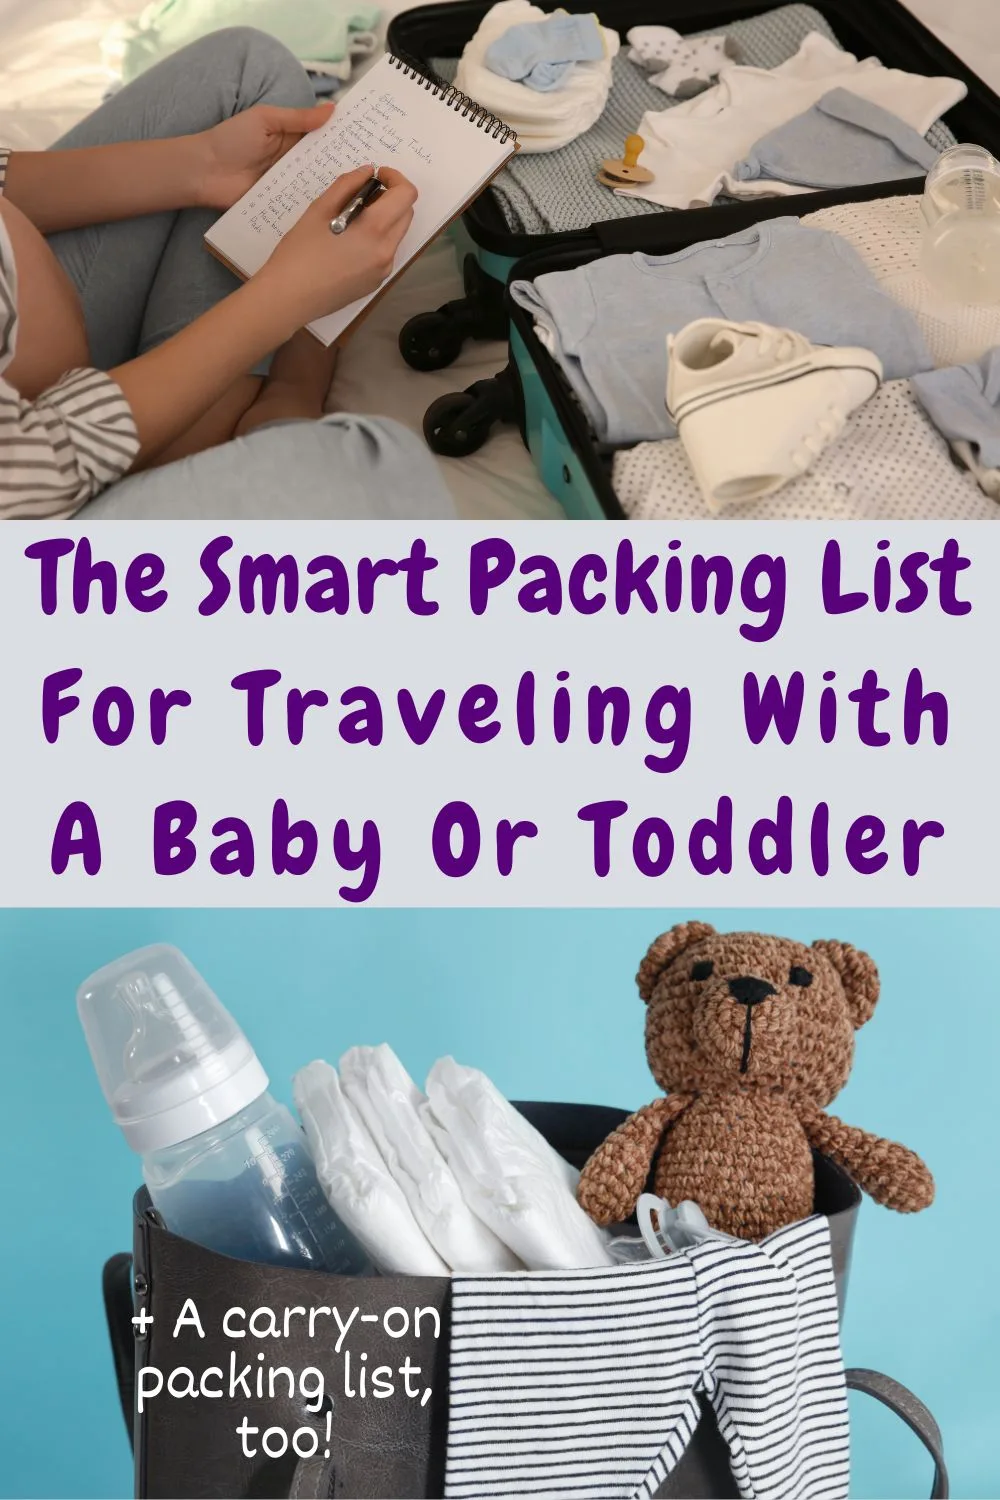 this simple, complete packing list for traveling with a baby or toddler makes it easy to get ready for your vacation. there's a complete carry-on check list, too.